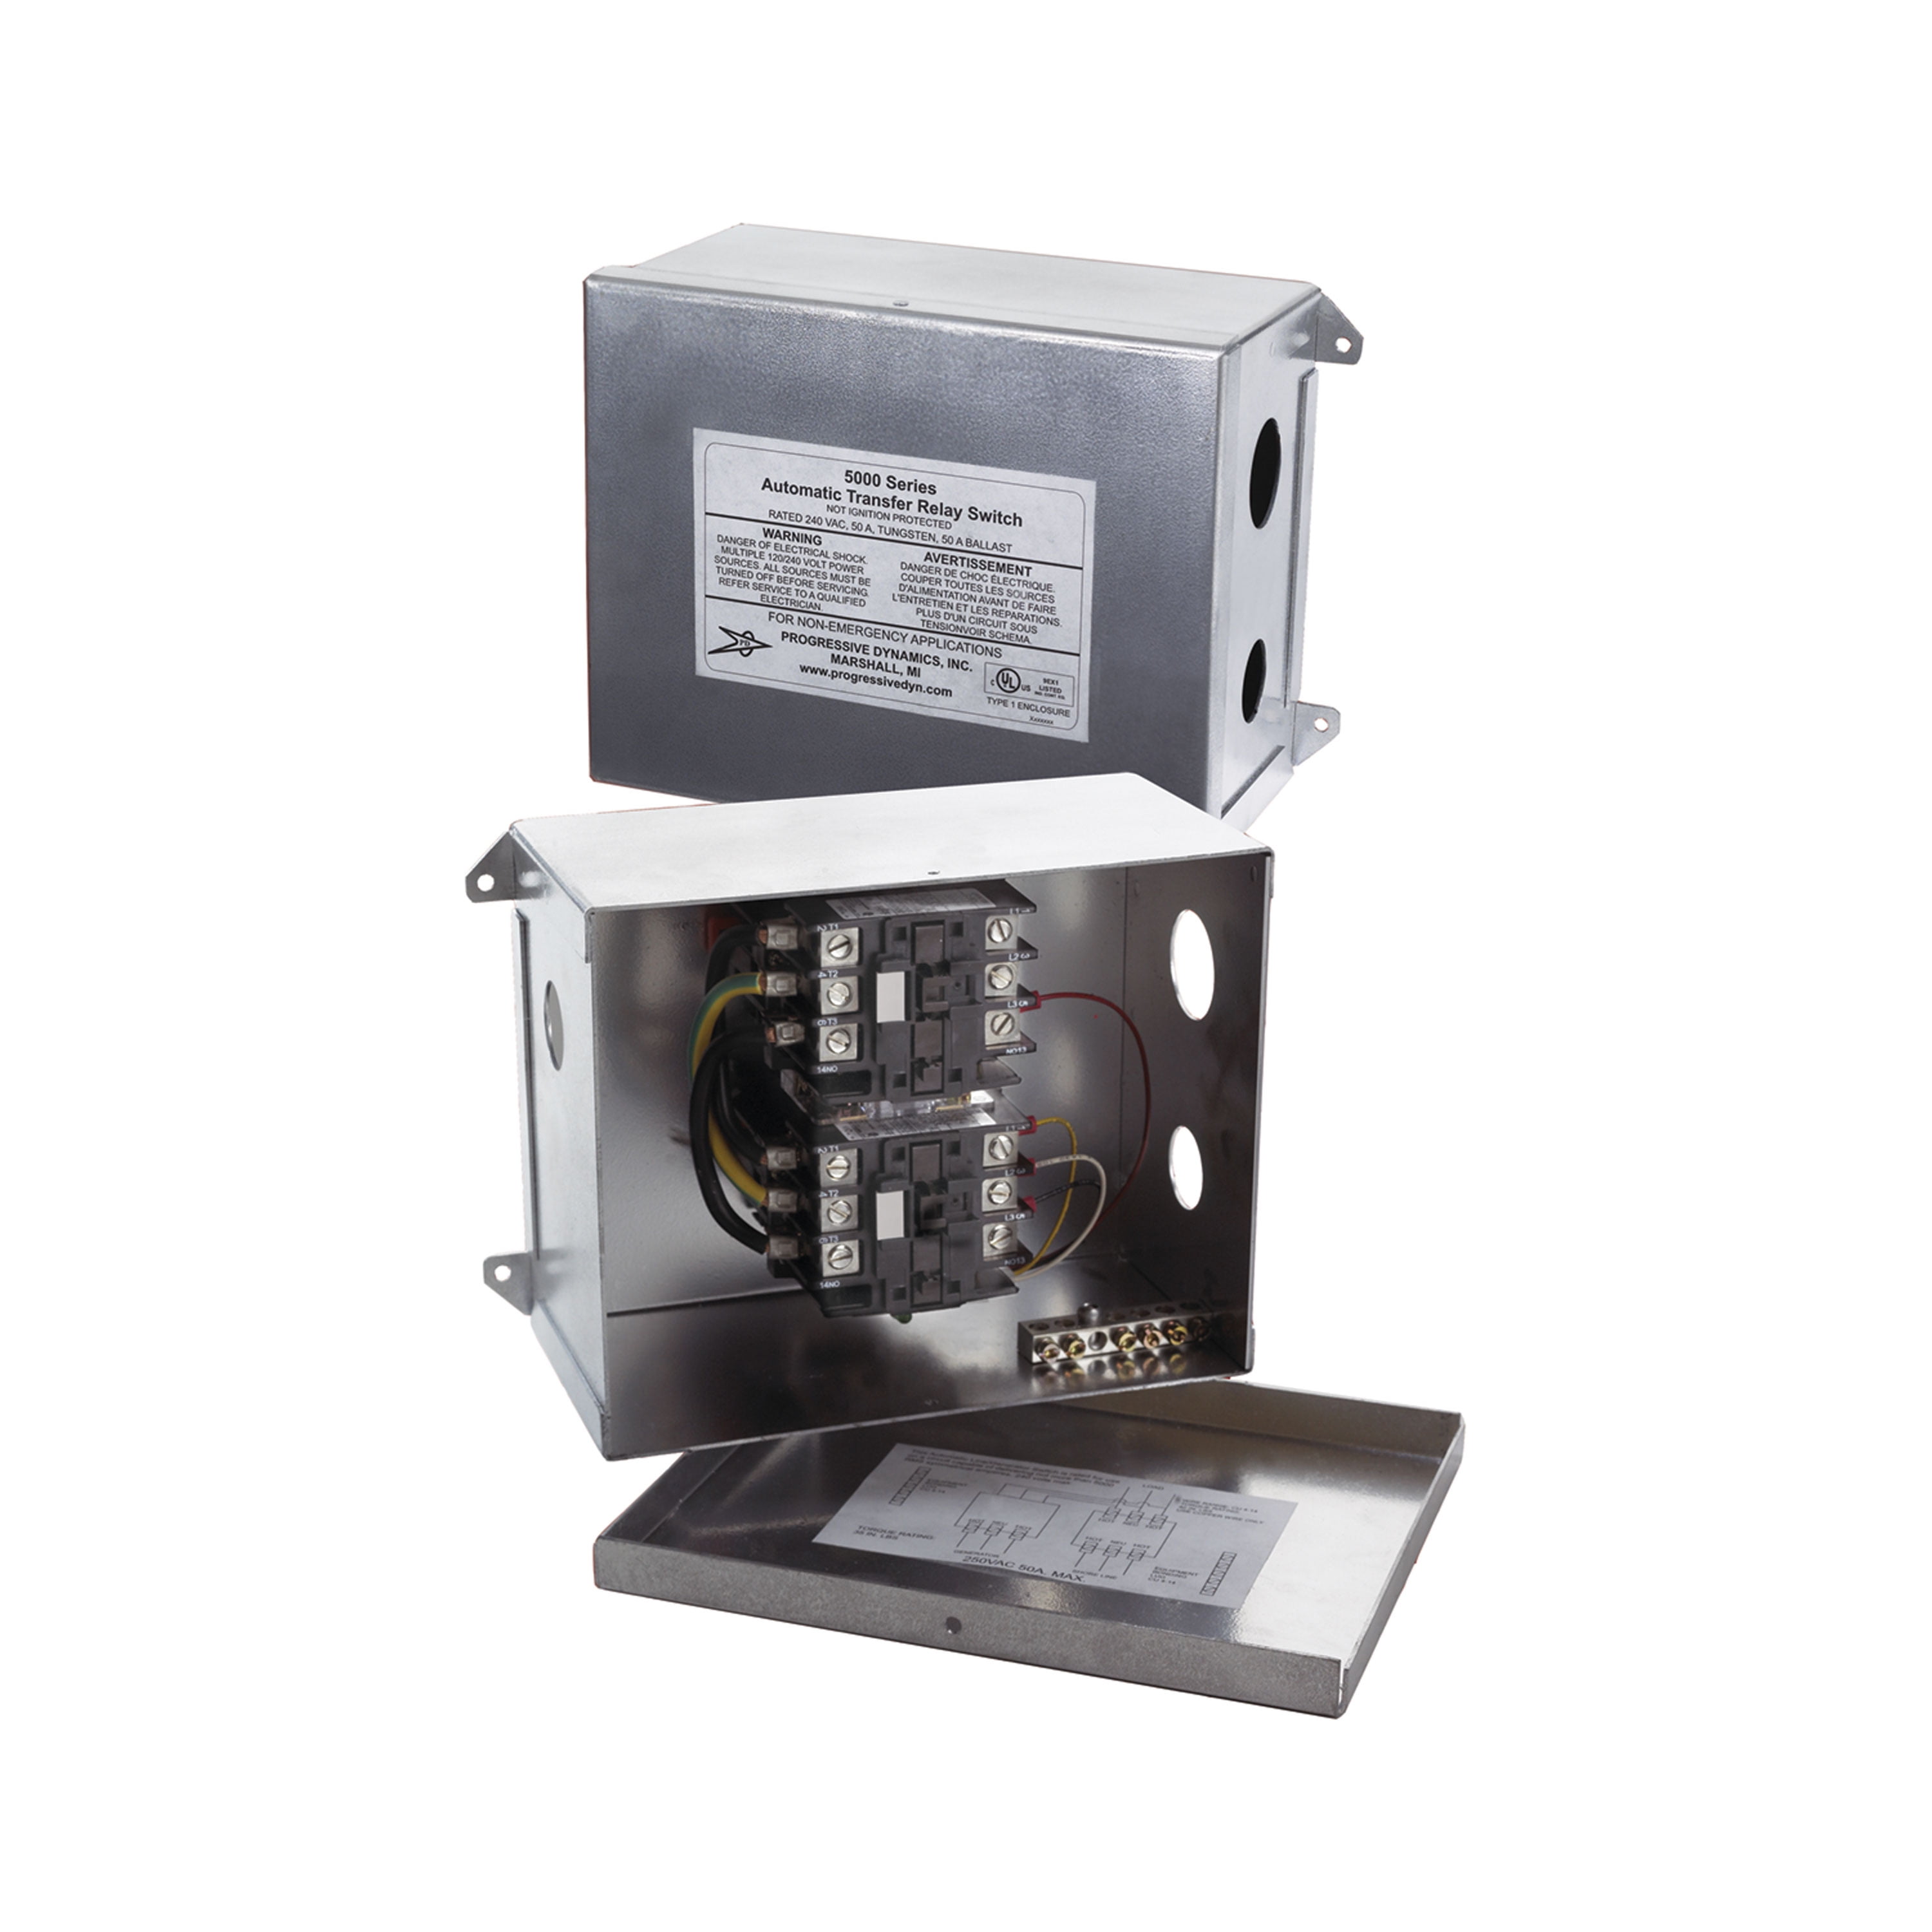 120 VAC 30 Amp w/Pigtail Connection Progressive Dynamics PD5110010V 5100 Series Automatic Transfer Switch 